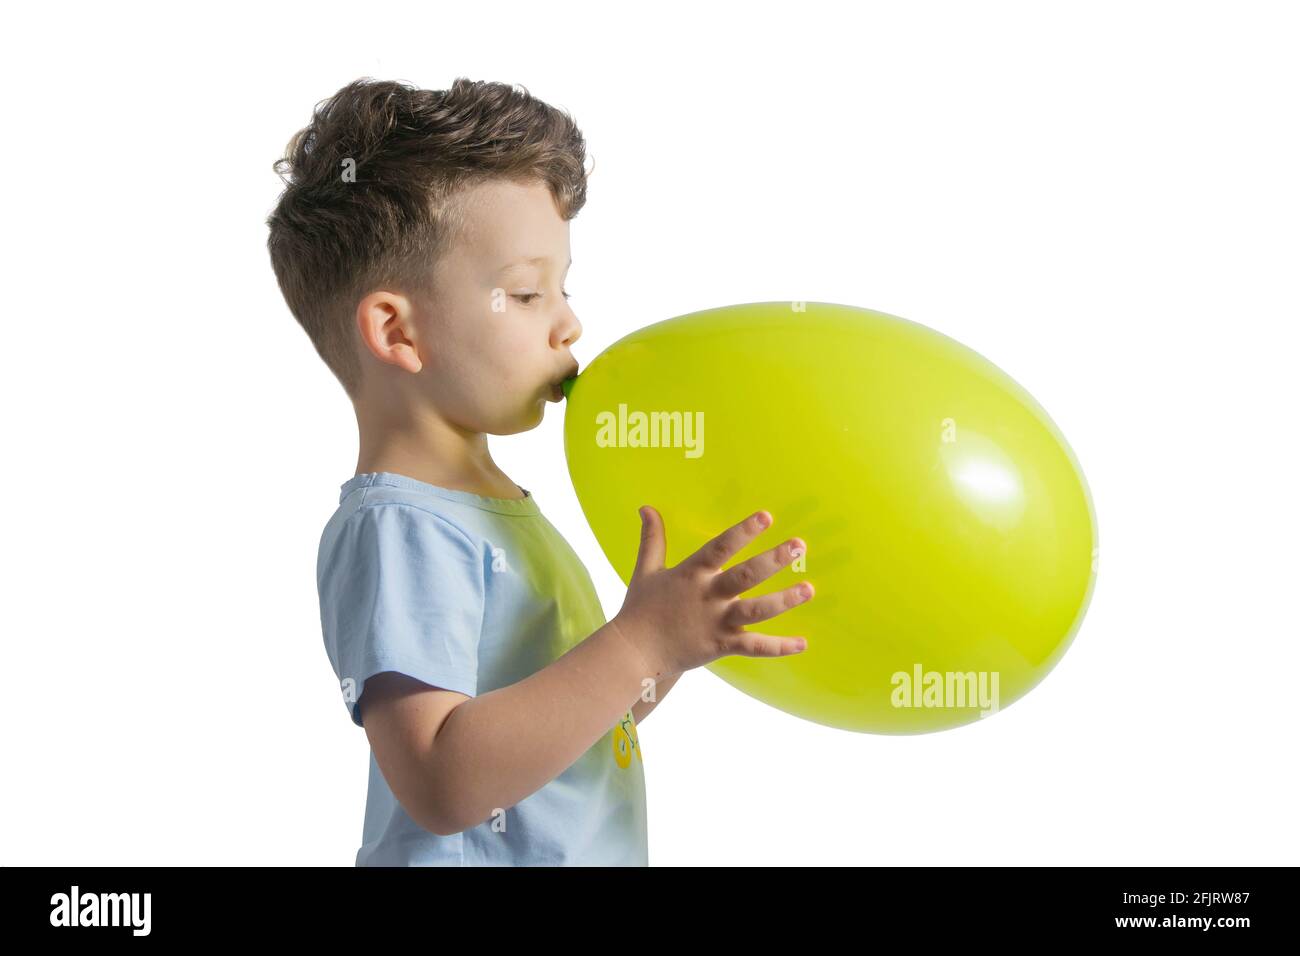 Funny boy blowing up a yellow balloon isolated on white background Stock  Photo - Alamy